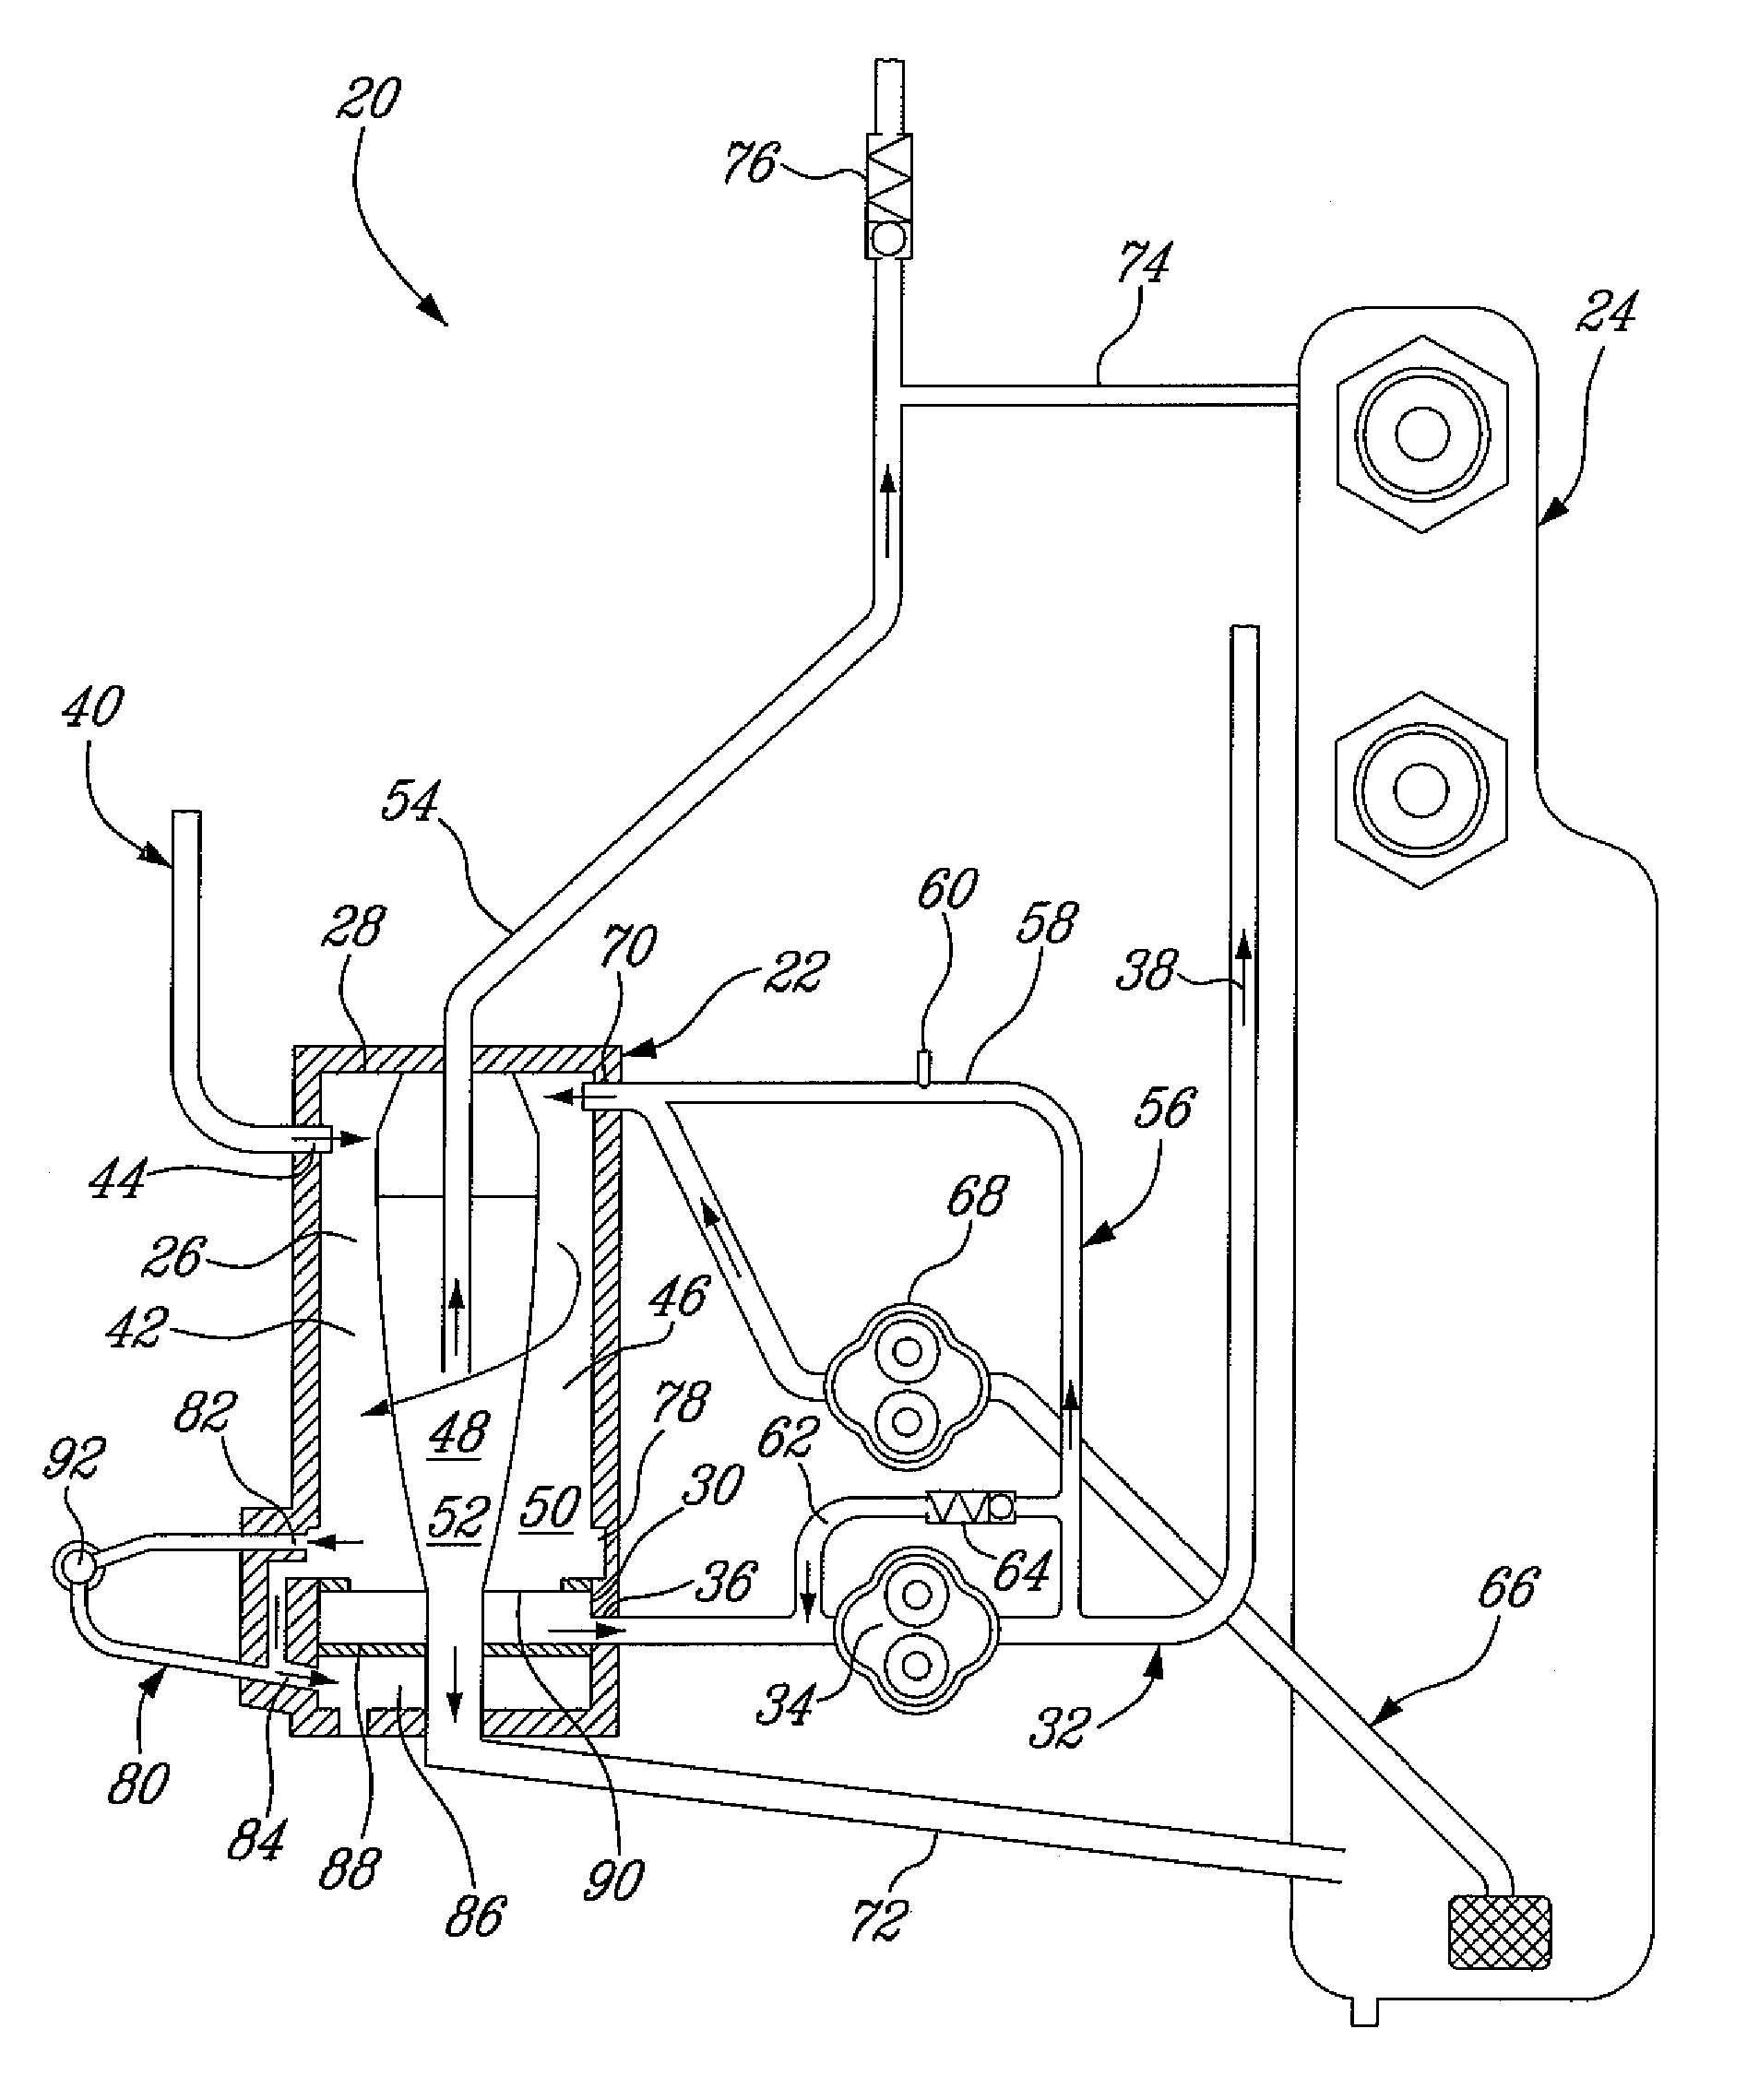 Lubrication system and method, and vortex flow separator for use therewith